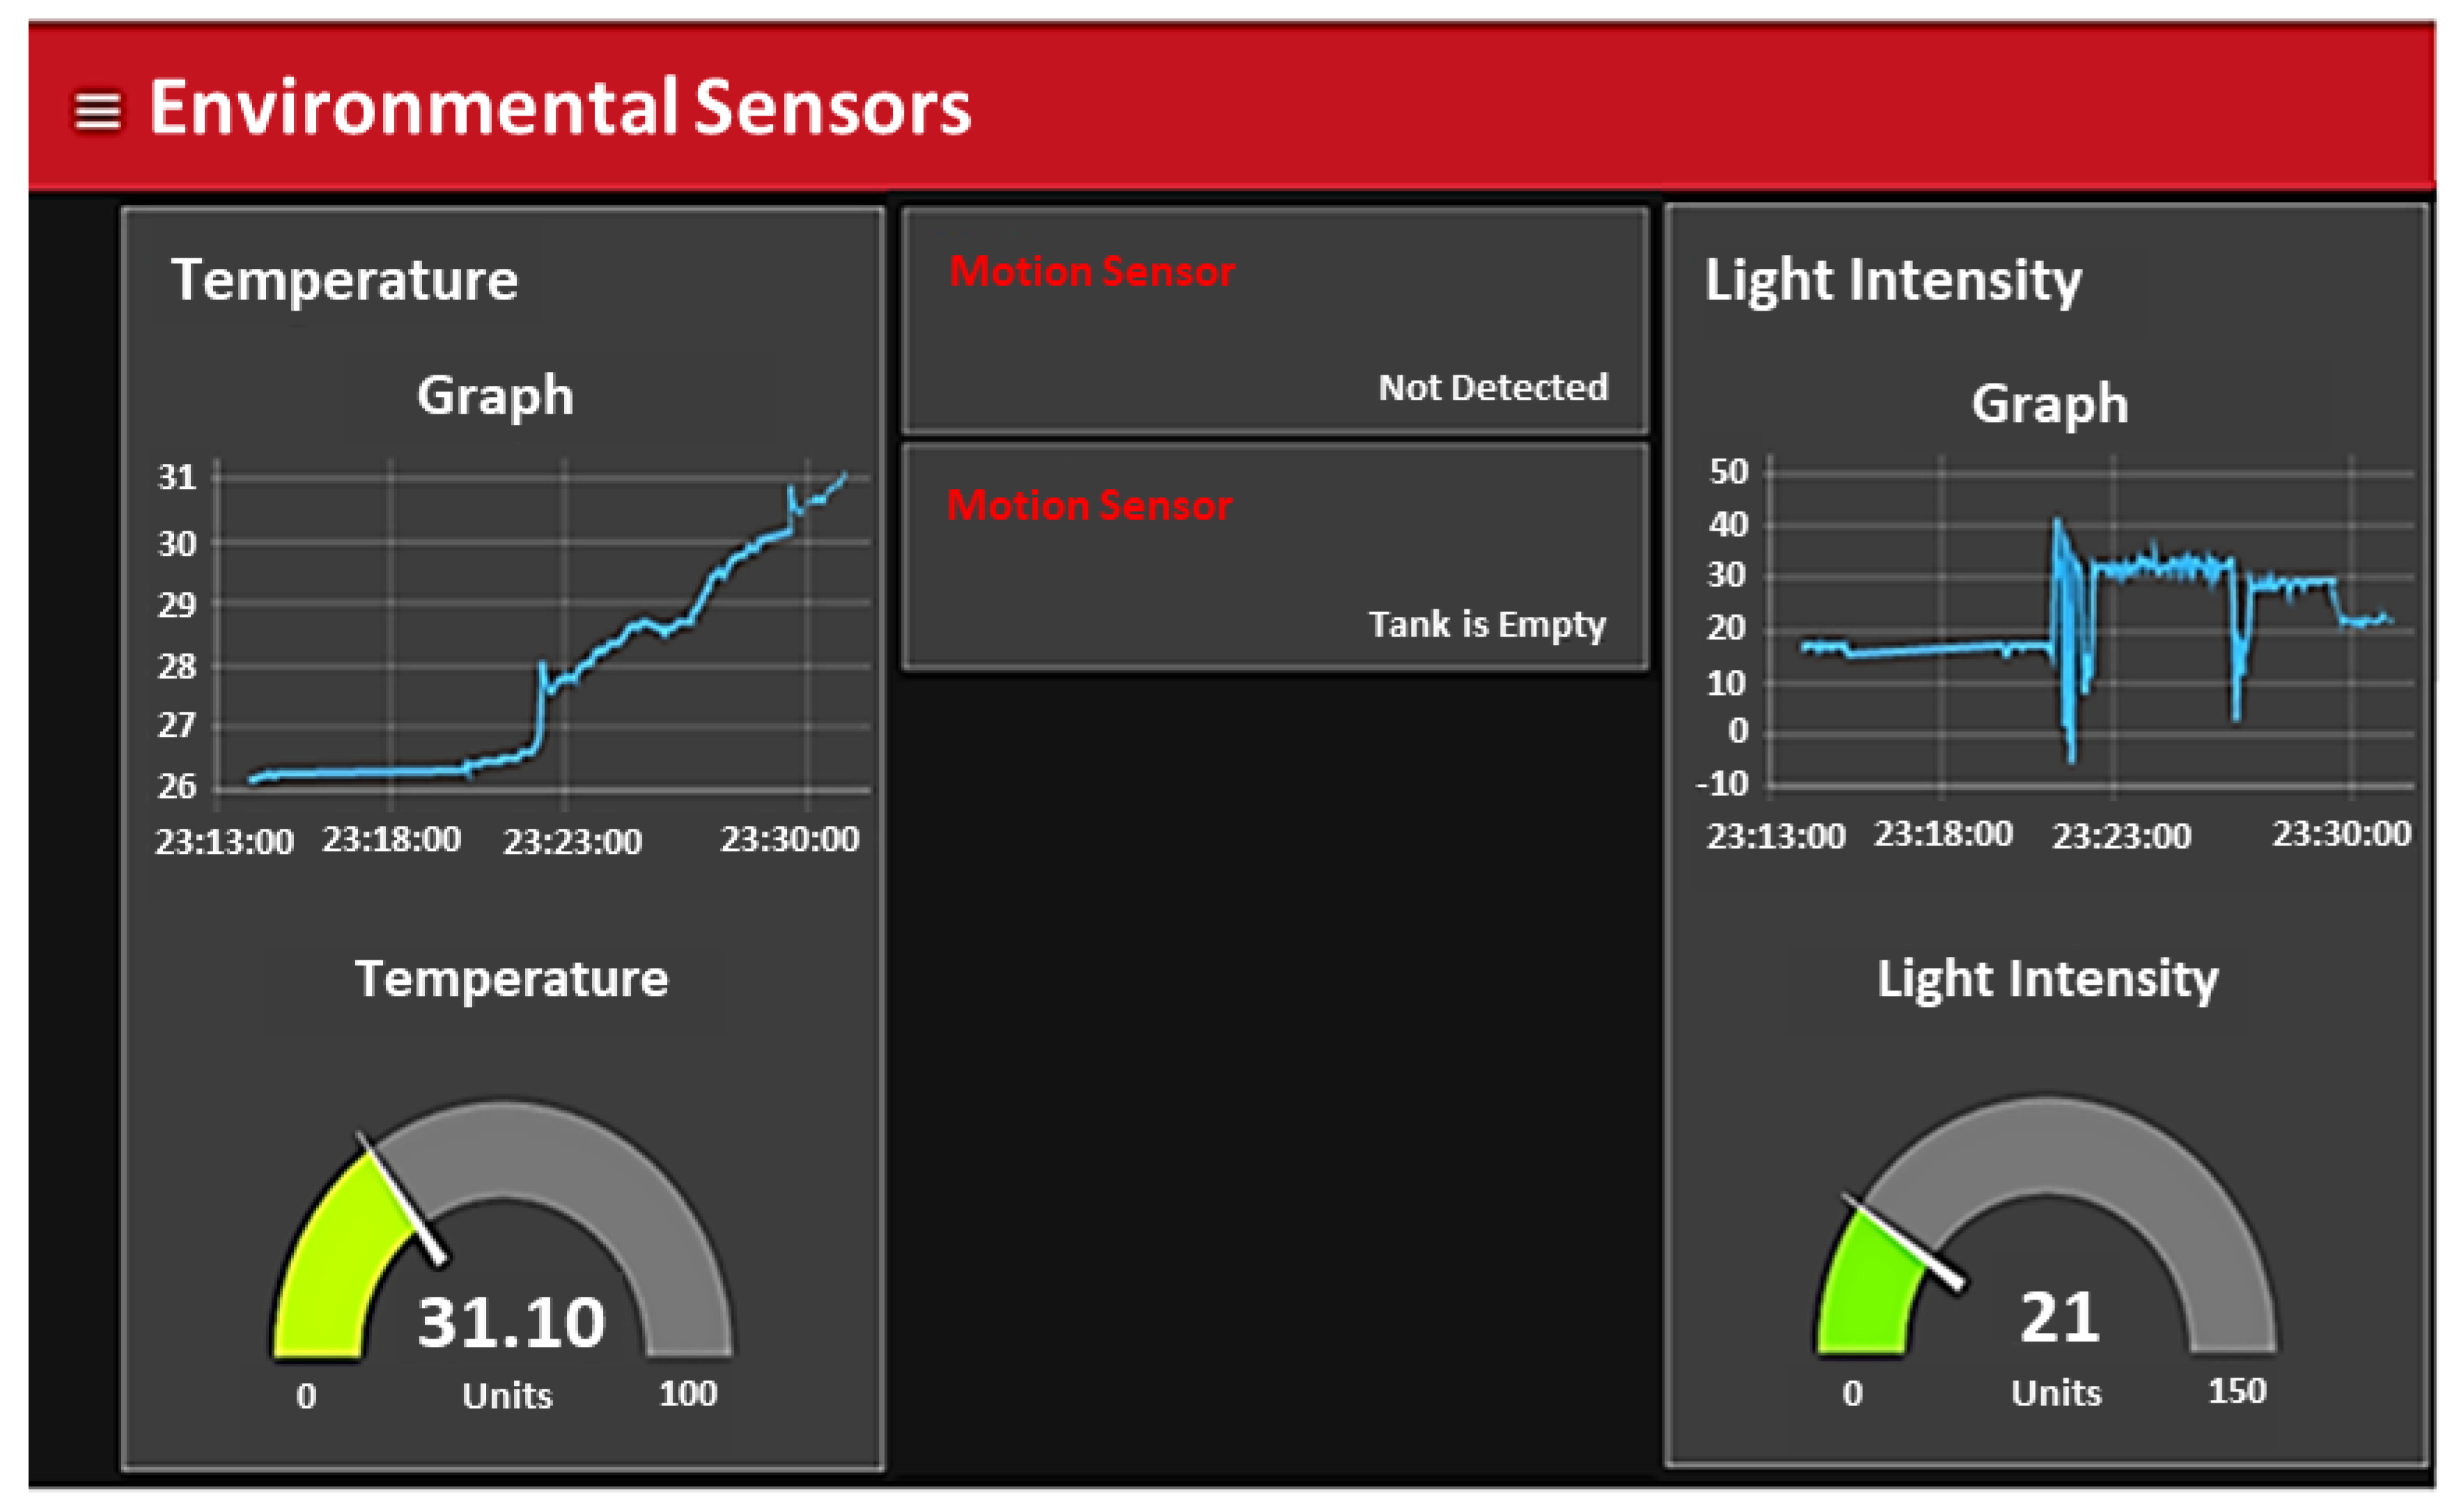 Light automation with door and motion sensor - Node-RED - Home